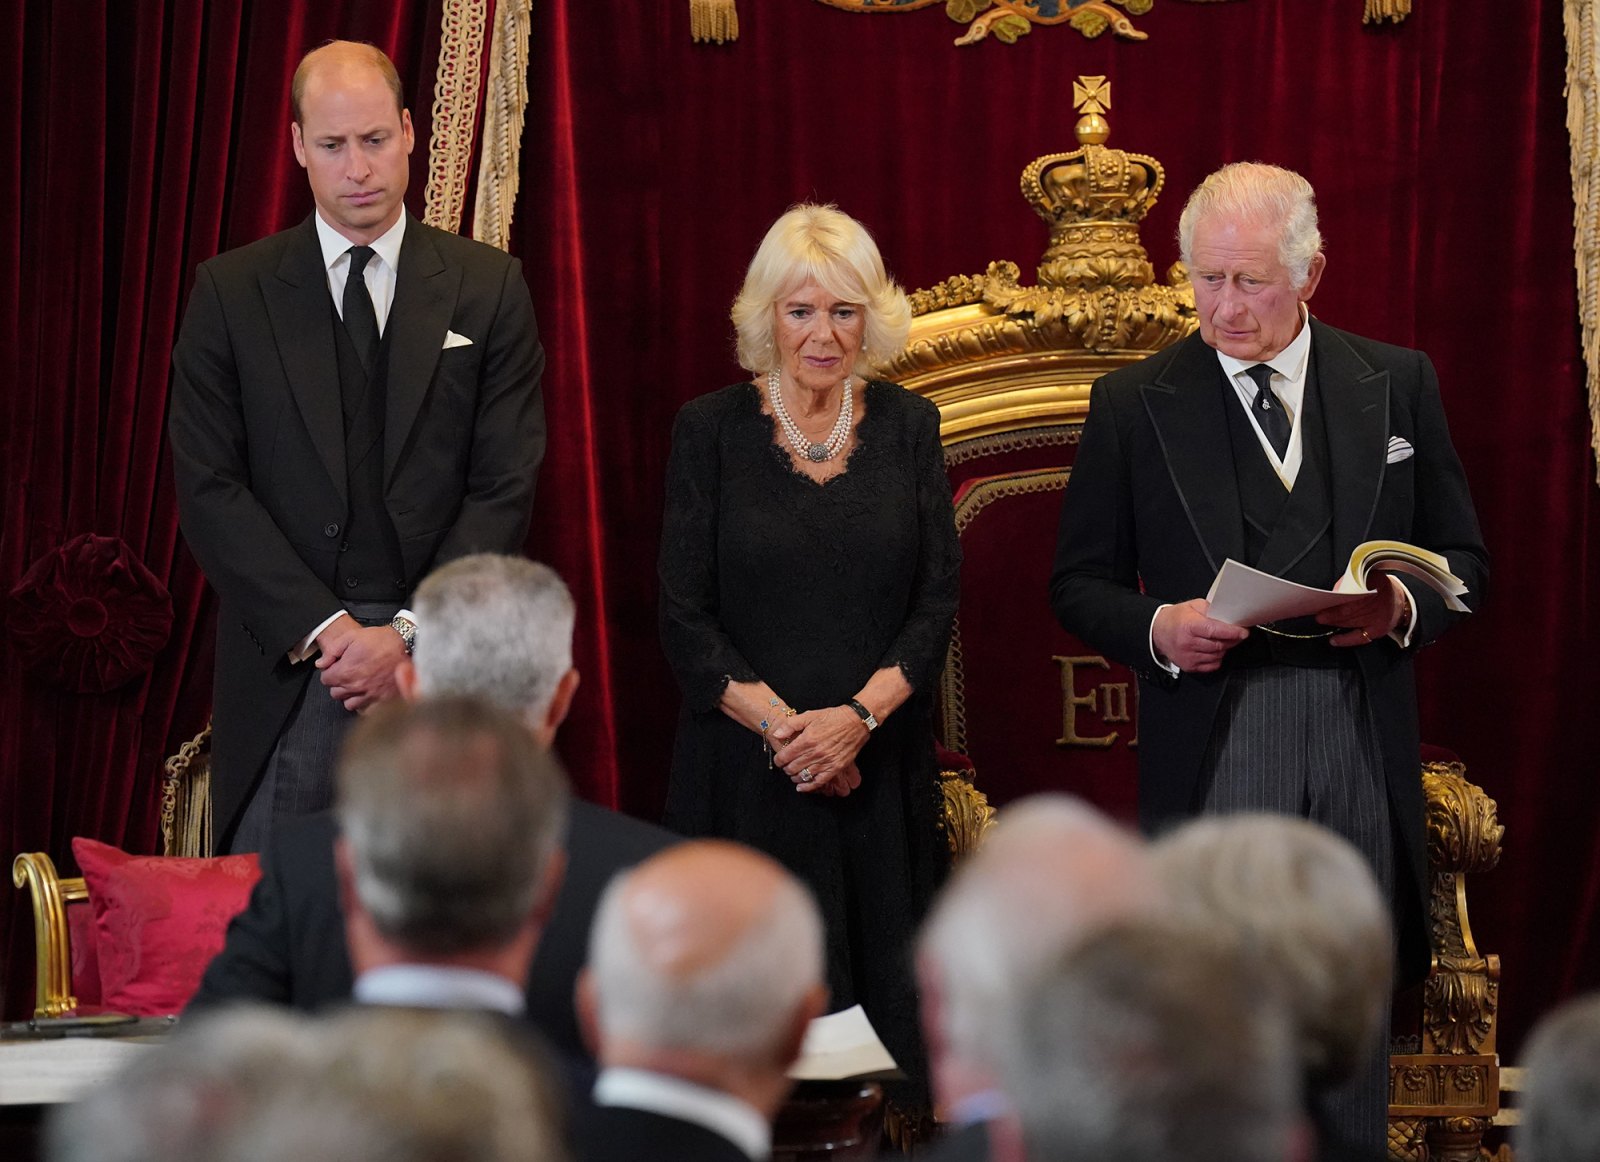 Prince-William-Queen-Consort-Camilla-in-Attendance-as-King-Charles-III-Officially-Declared-Monarch.jpg